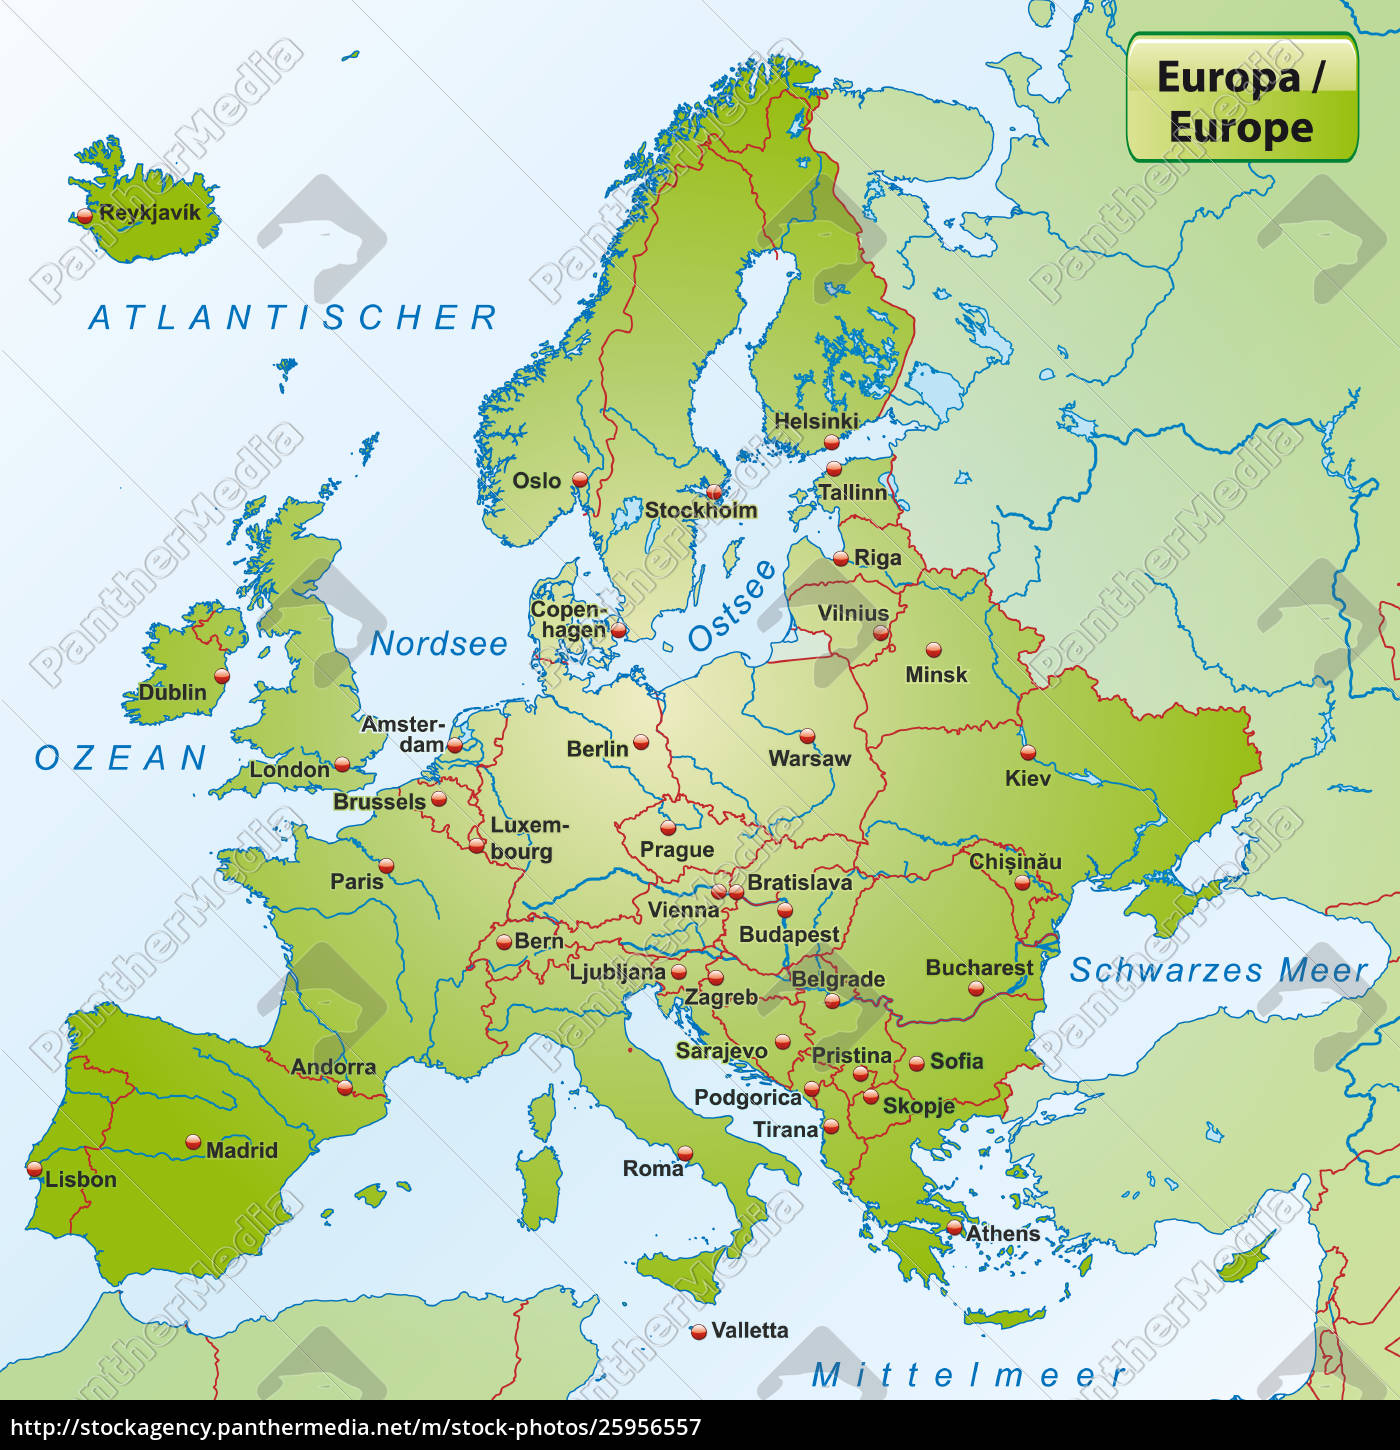 Map of Europe with capital cities - Stock Photo - #25956557 ...